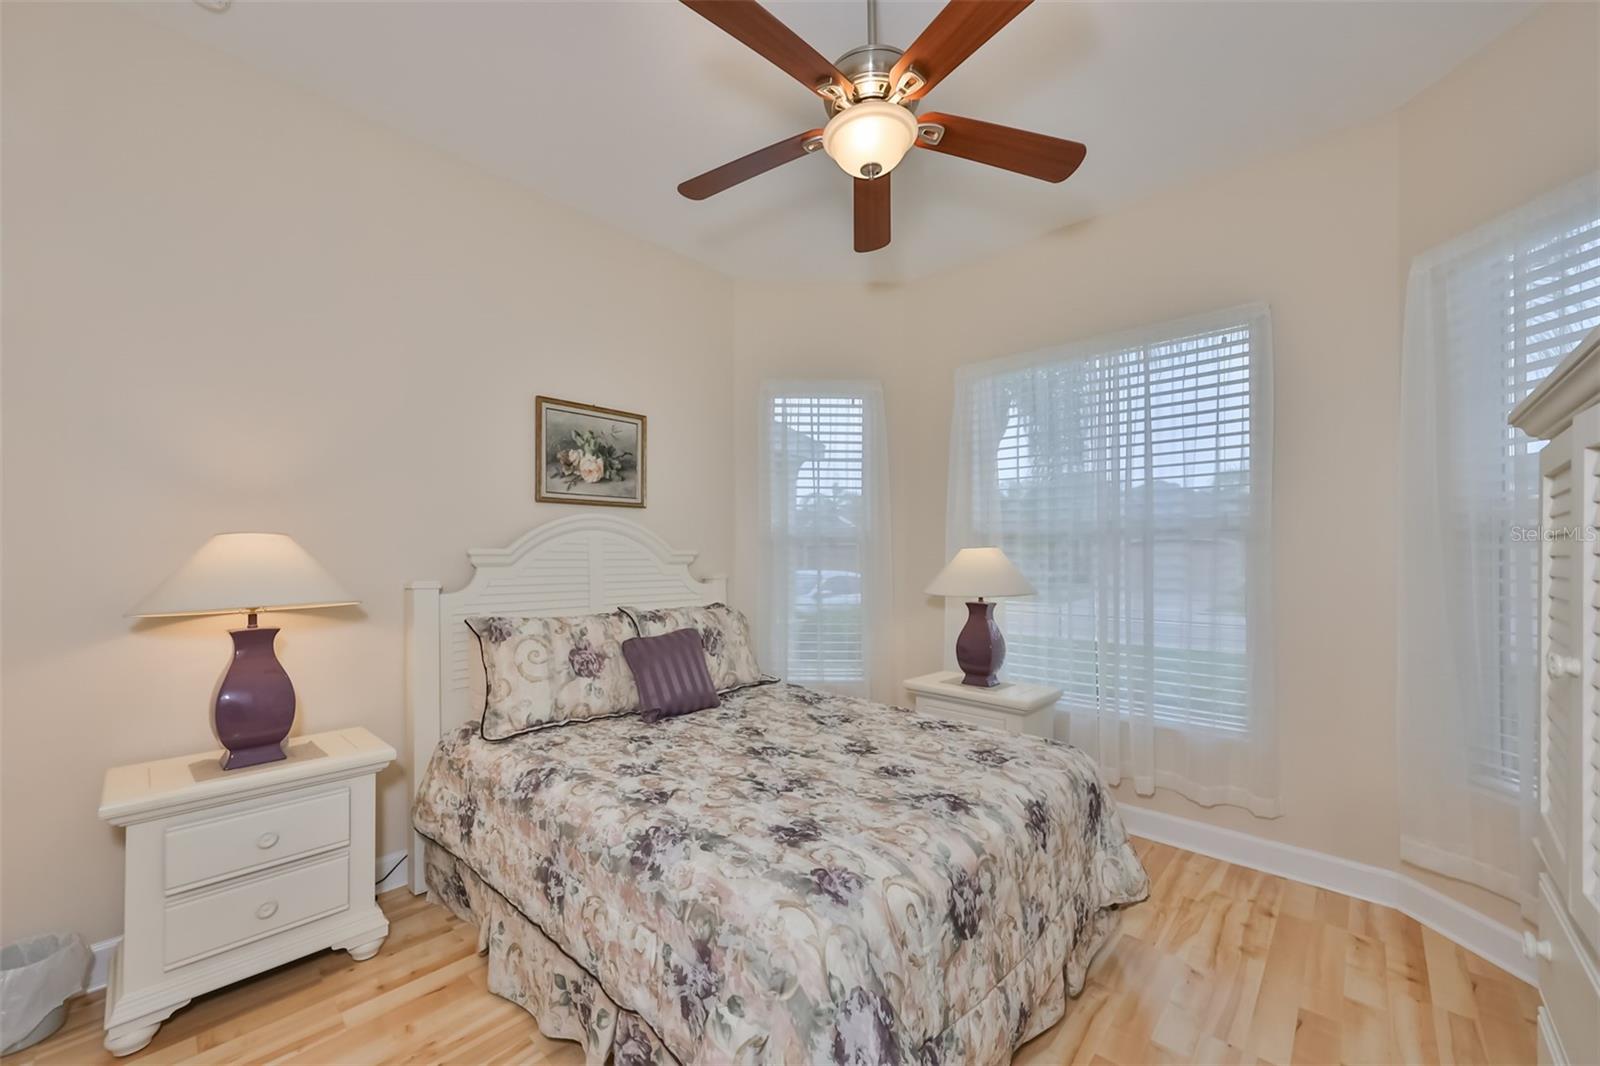 Bedroom #2 has beautiful large wrap around windows for ample natural lighting and lovely laminate flooring.